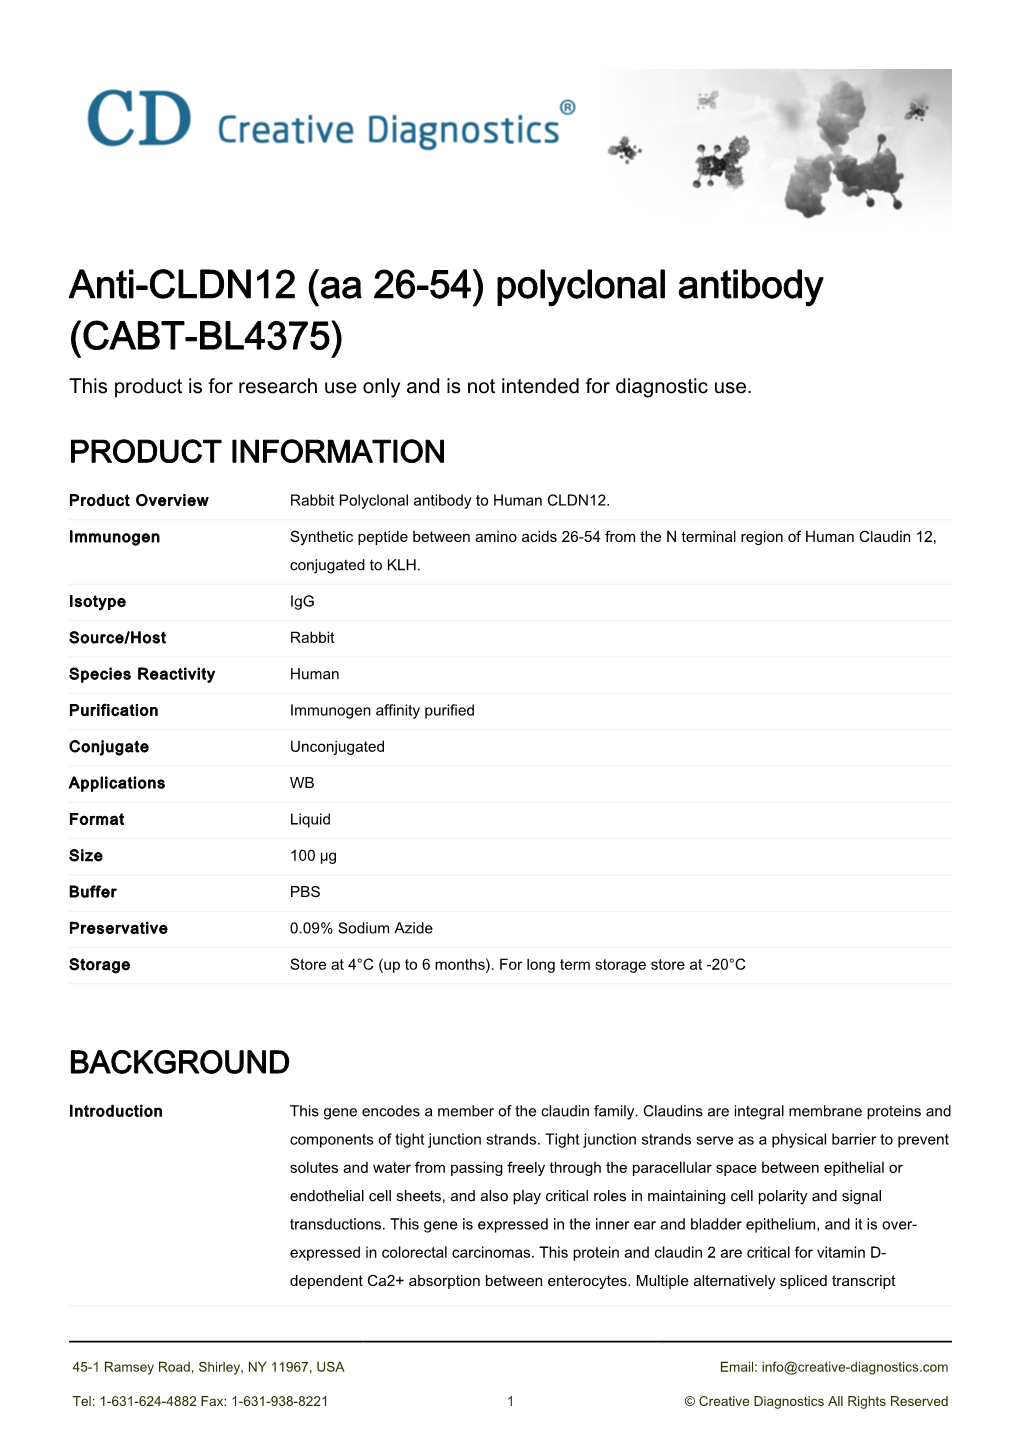 Anti-CLDN12 (Aa 26-54) Polyclonal Antibody (CABT-BL4375) This Product Is for Research Use Only and Is Not Intended for Diagnostic Use